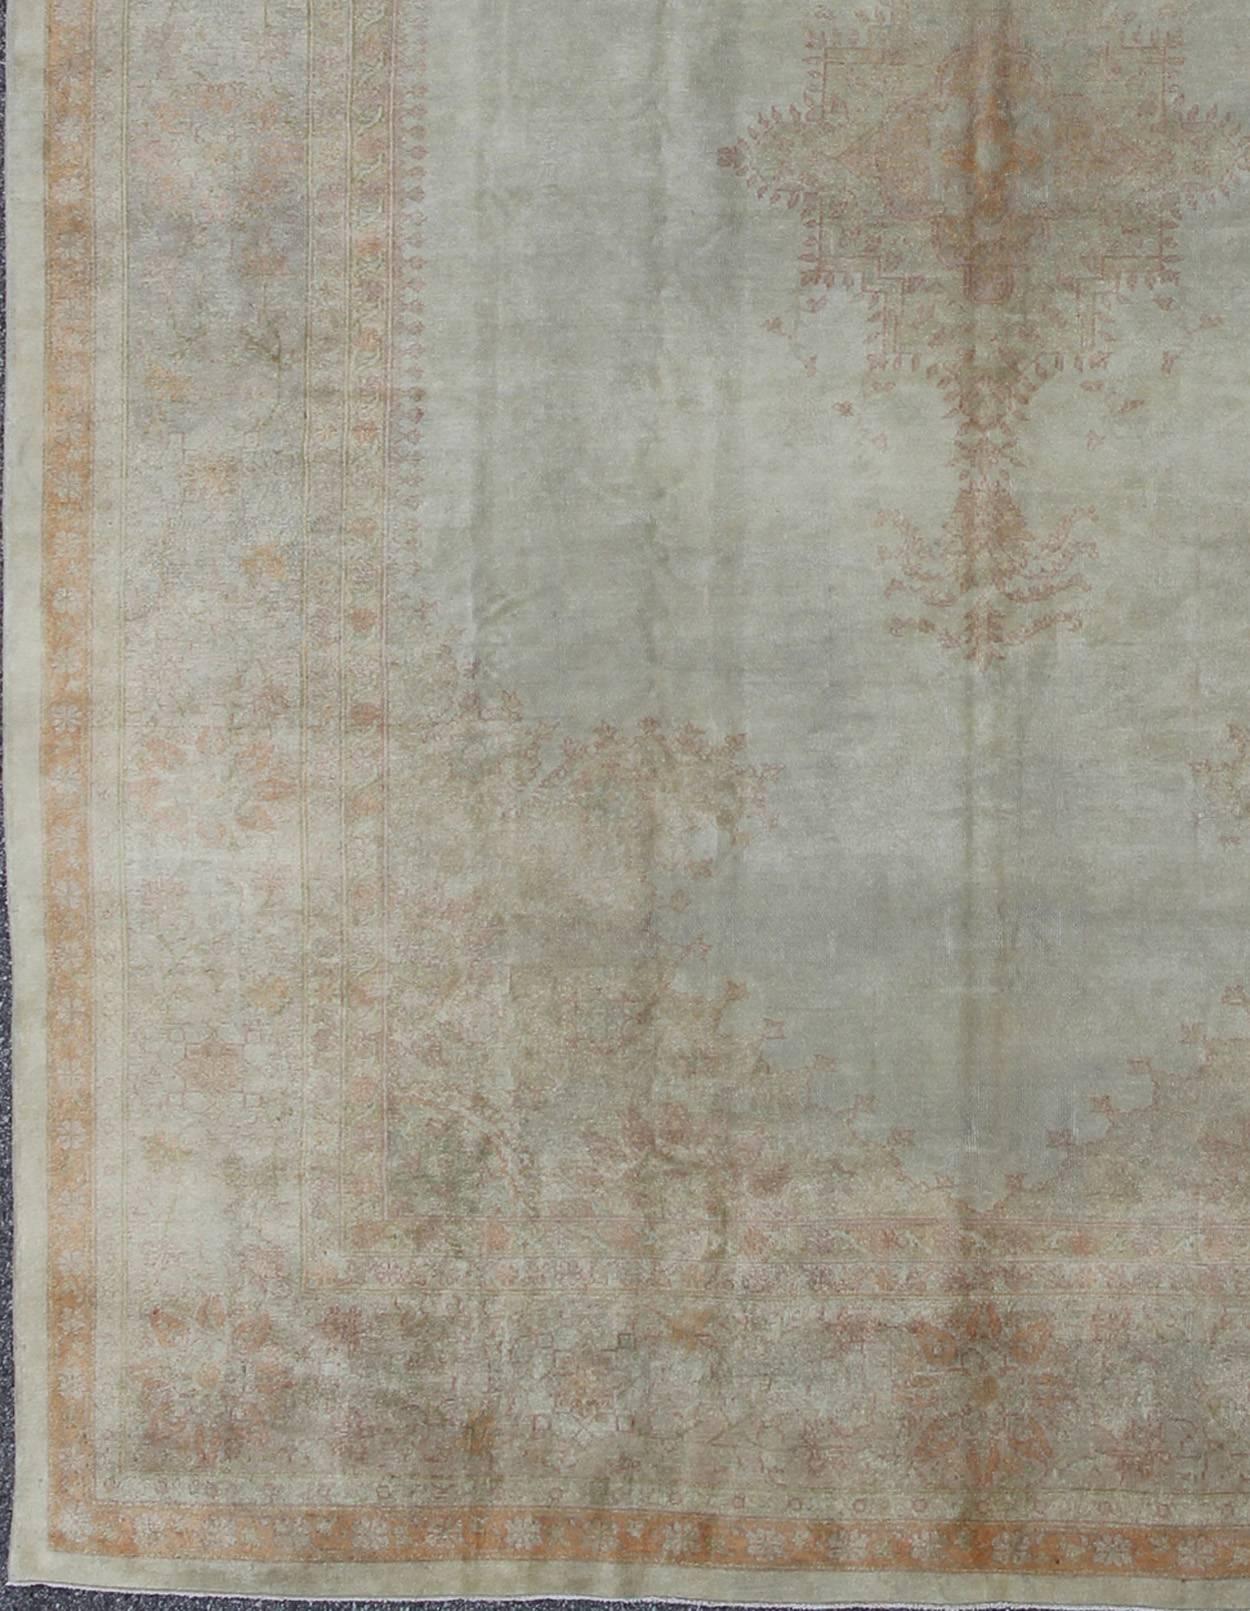 Antique Turkish Burlu Oushak Rug with Fine Weave in Muted Colors:
Measures: 10’8 x 14’5.
This stunning antique Turkish Oushak from the late 19th Century bears a remarkably sophisticated palette of soft colors such as taupe, silver, mocha and cream.